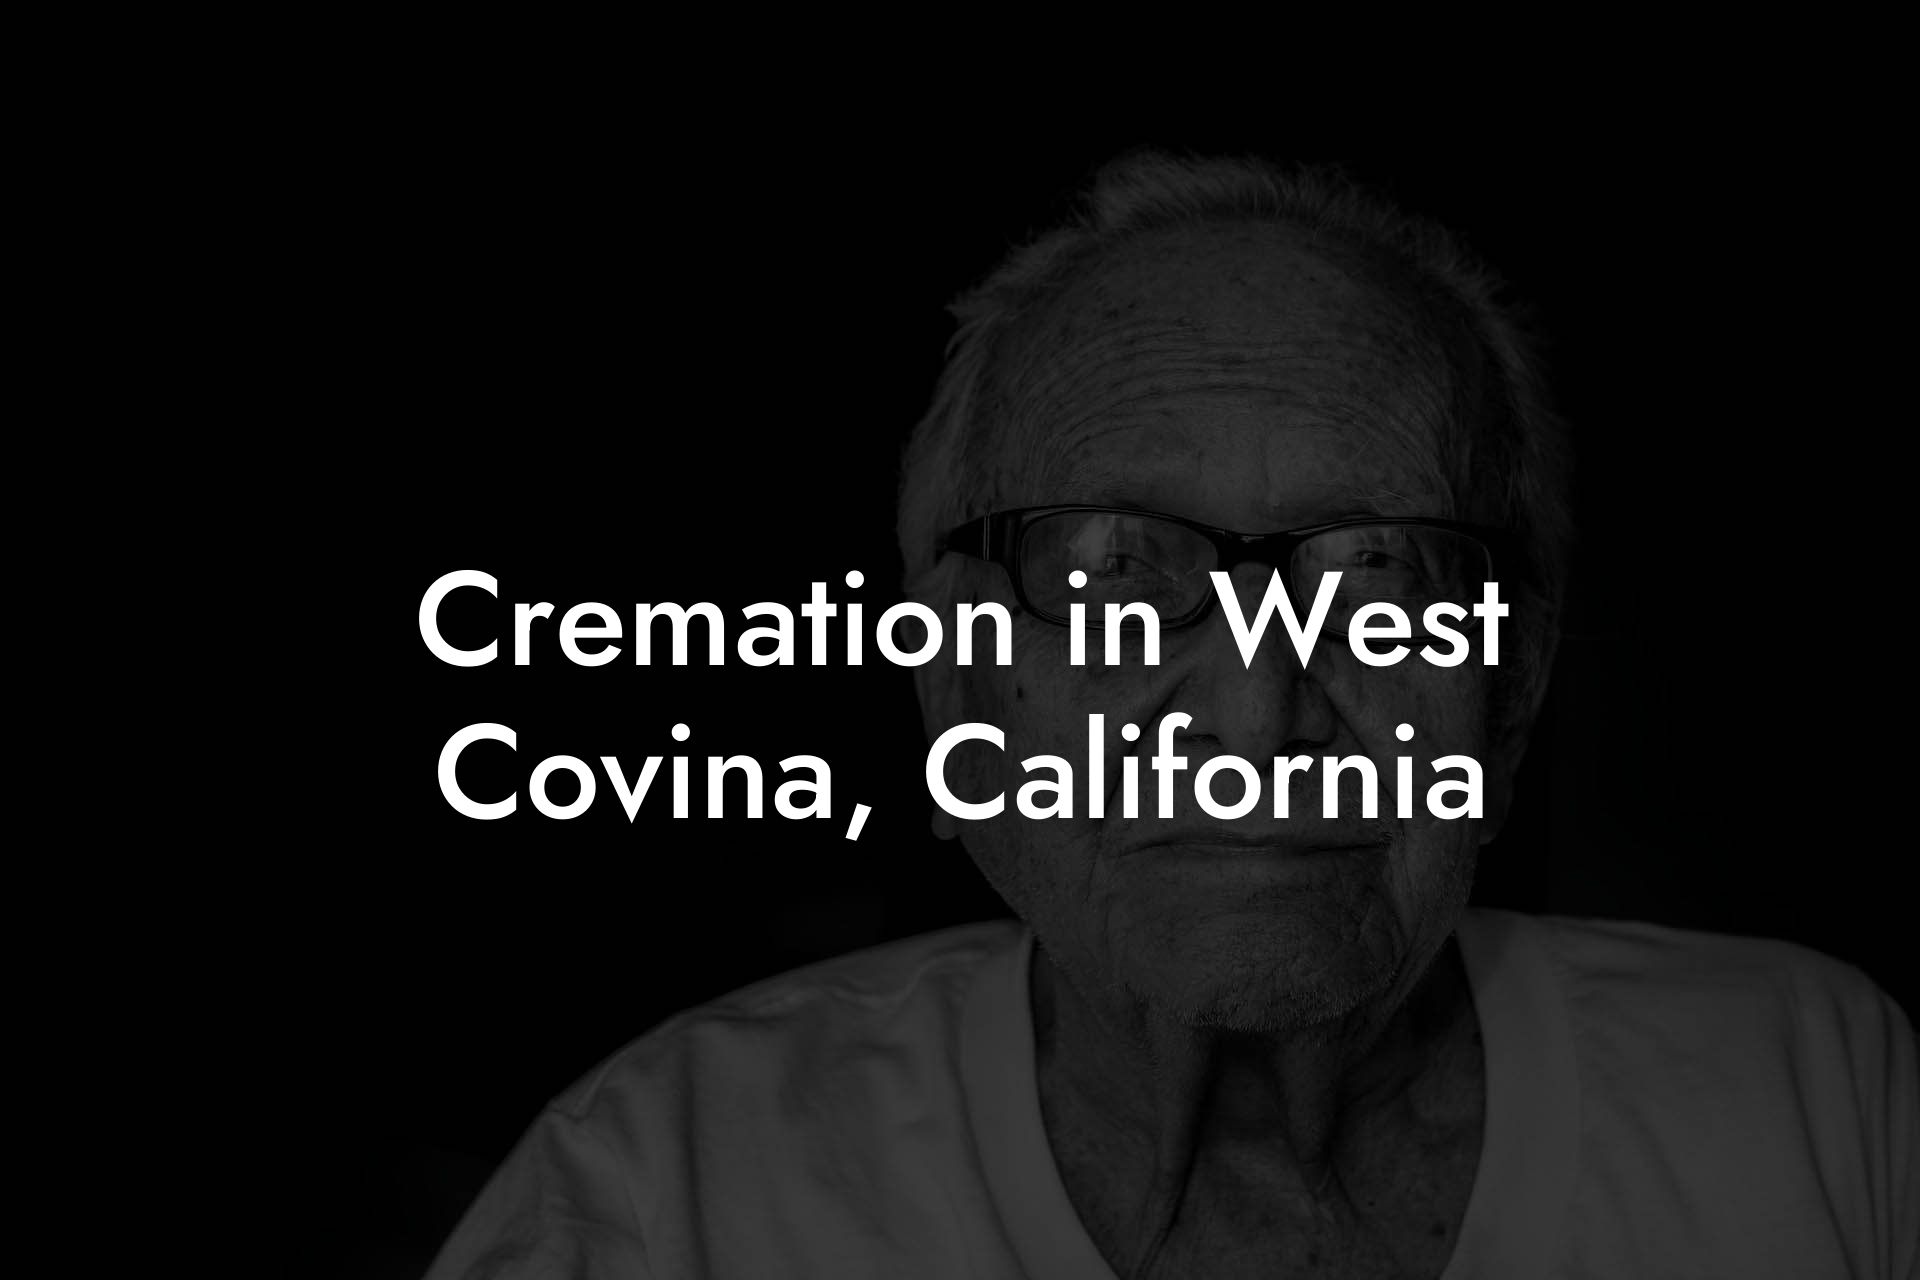 Cremation in West Covina, California